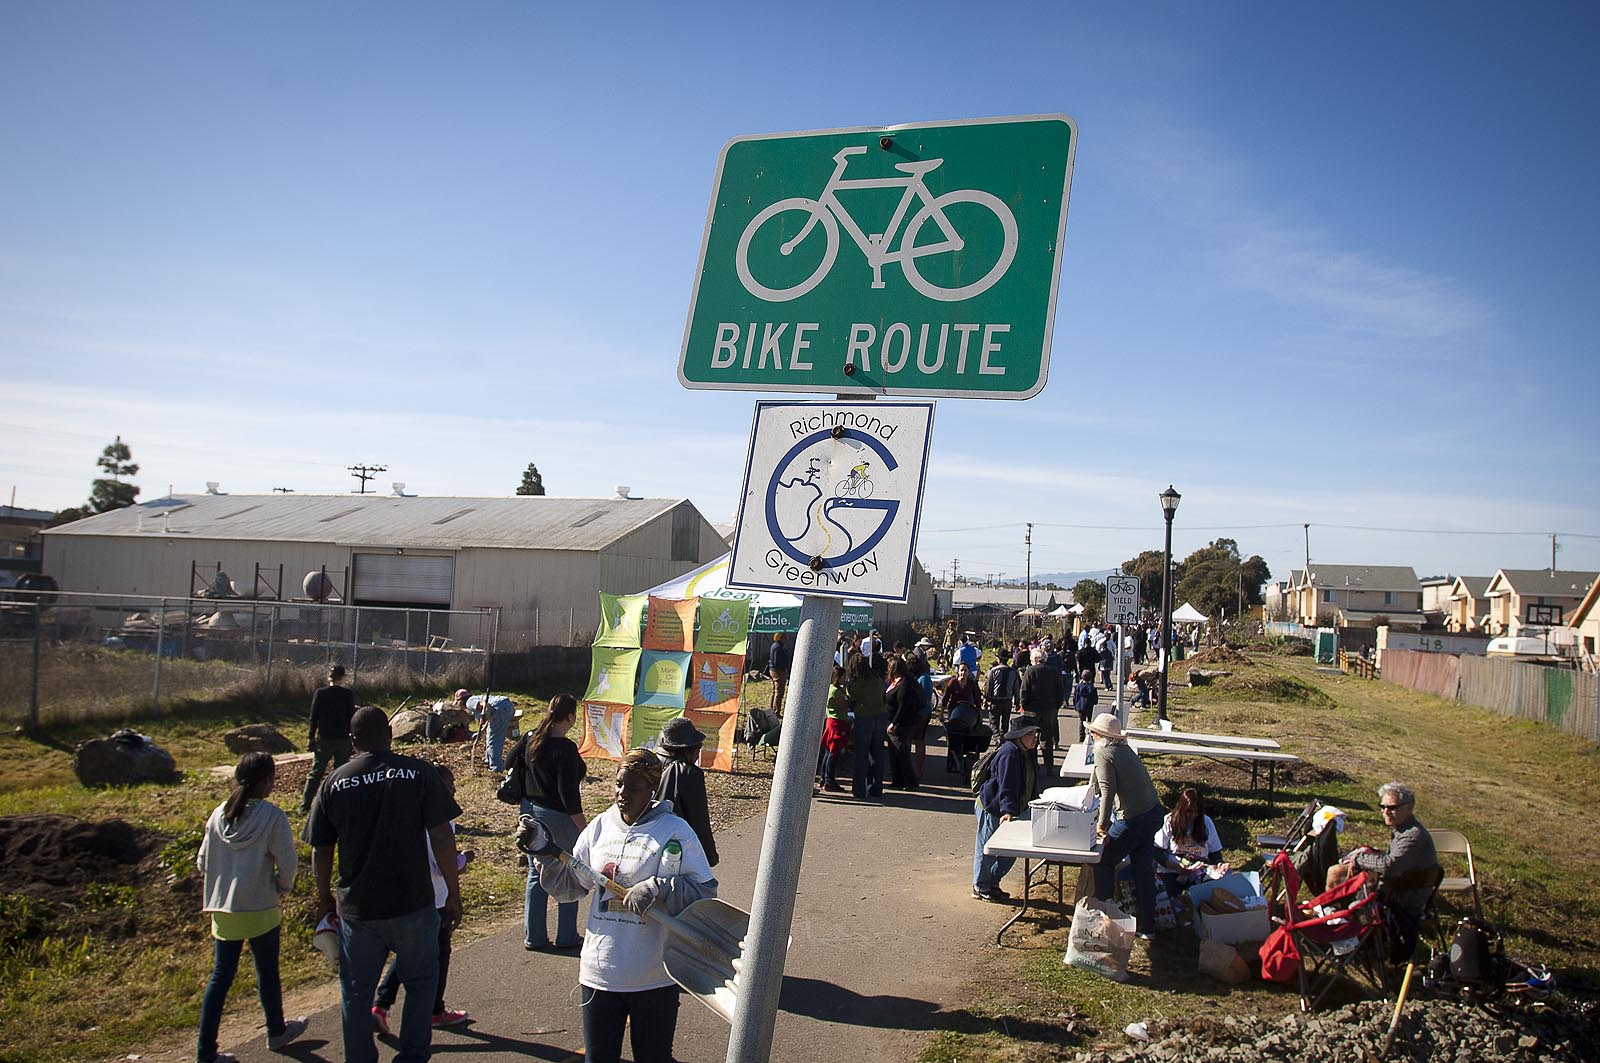 Richmond residents dig into Greenway and MLK celebration - Richmond Confidential1600 x 1063